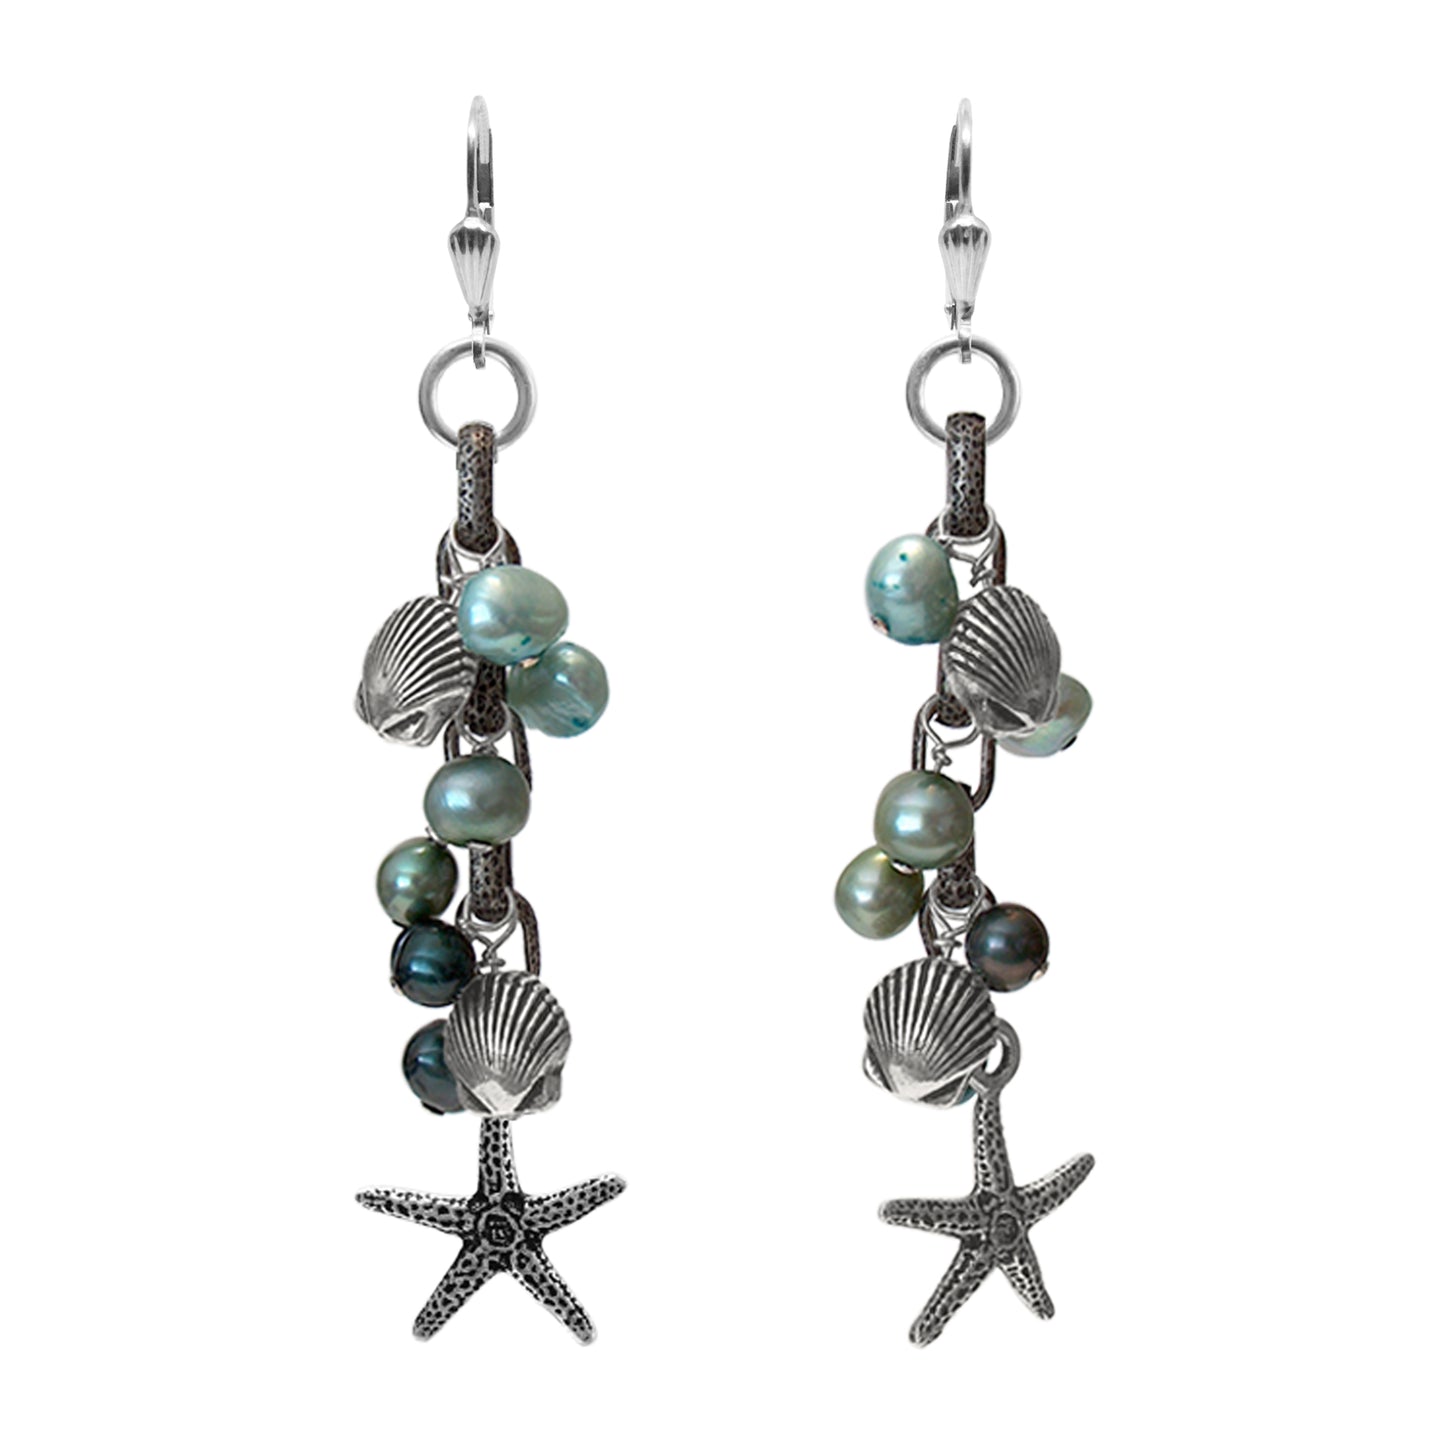 Beach Charm Earrings / choose from 5 color options / 80mm length / leverback earwires